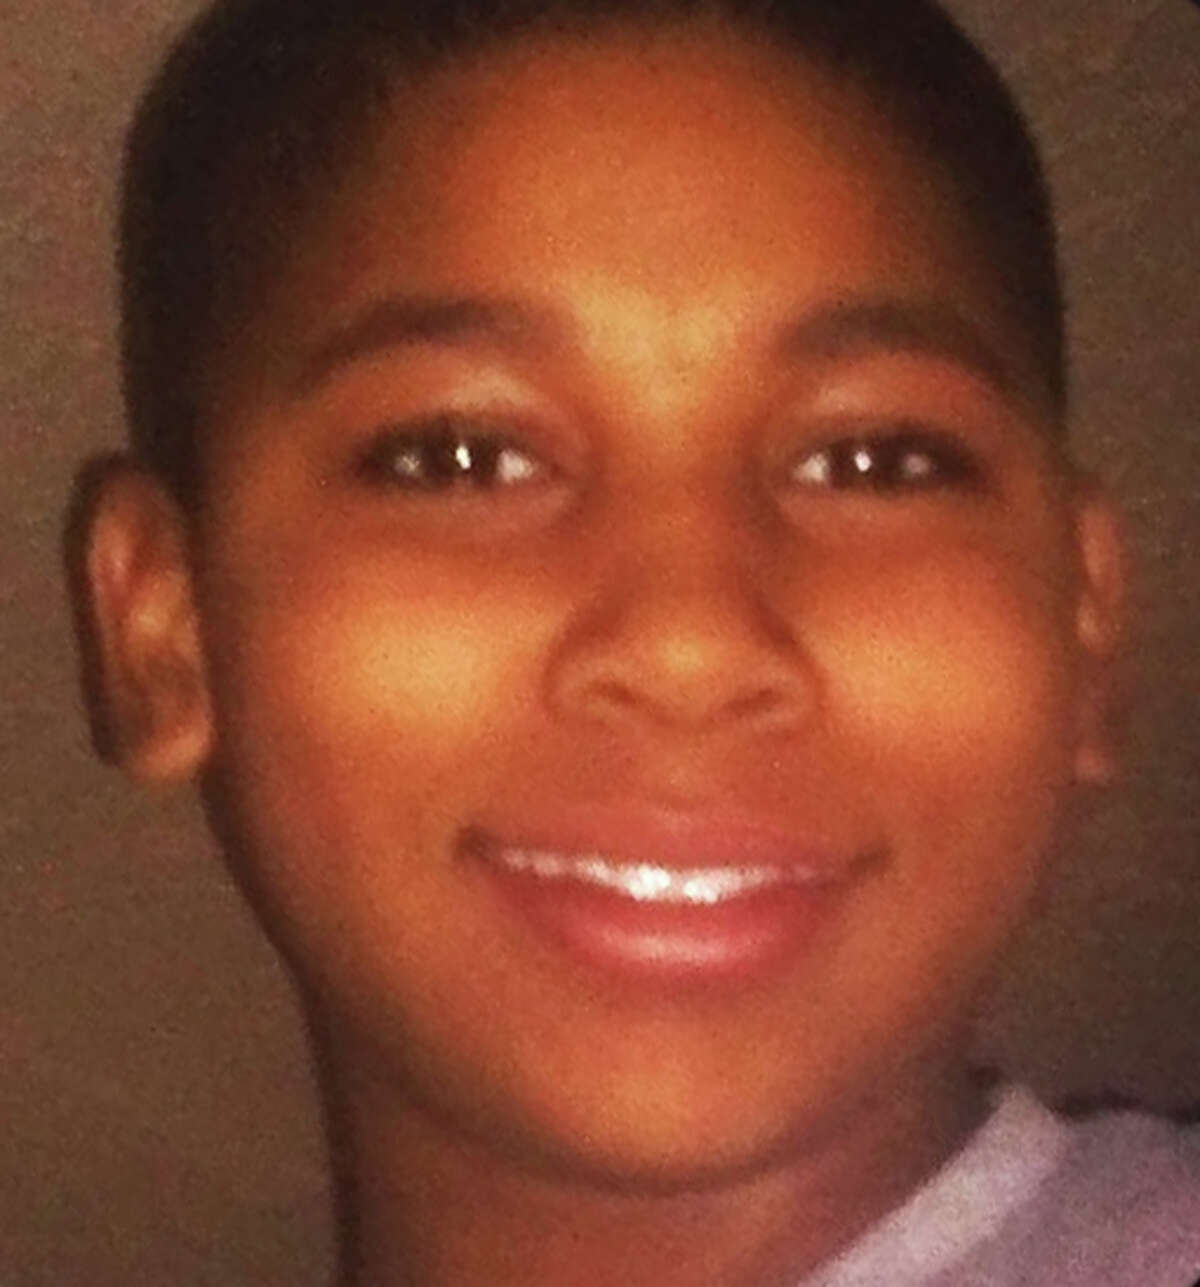 Tamir Rice, a 12-year-old who died Nov. 23, a day after an officer shot him outside a recreation center.